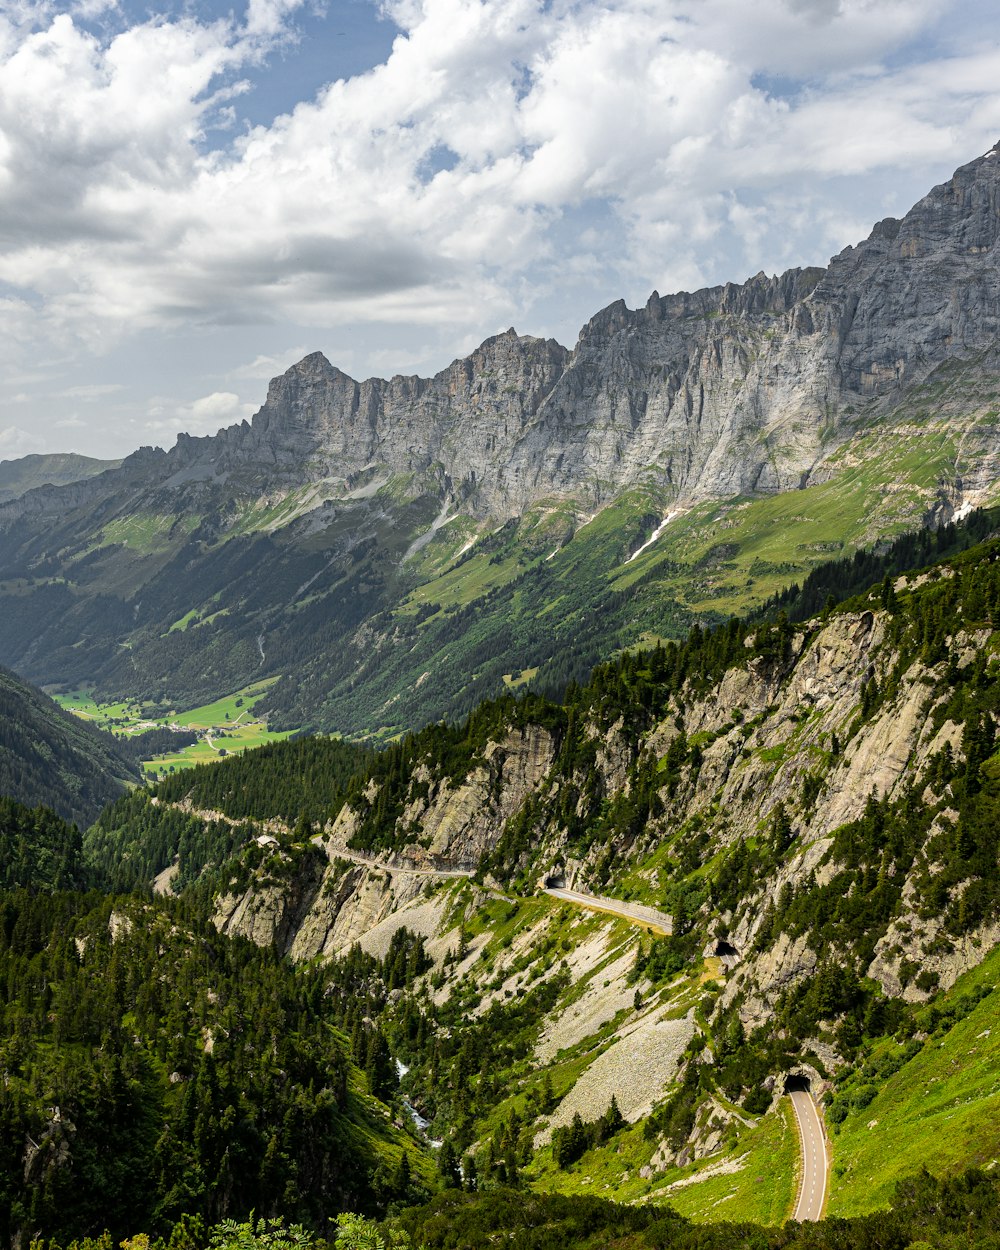 a scenic view of a mountain valley with a winding road